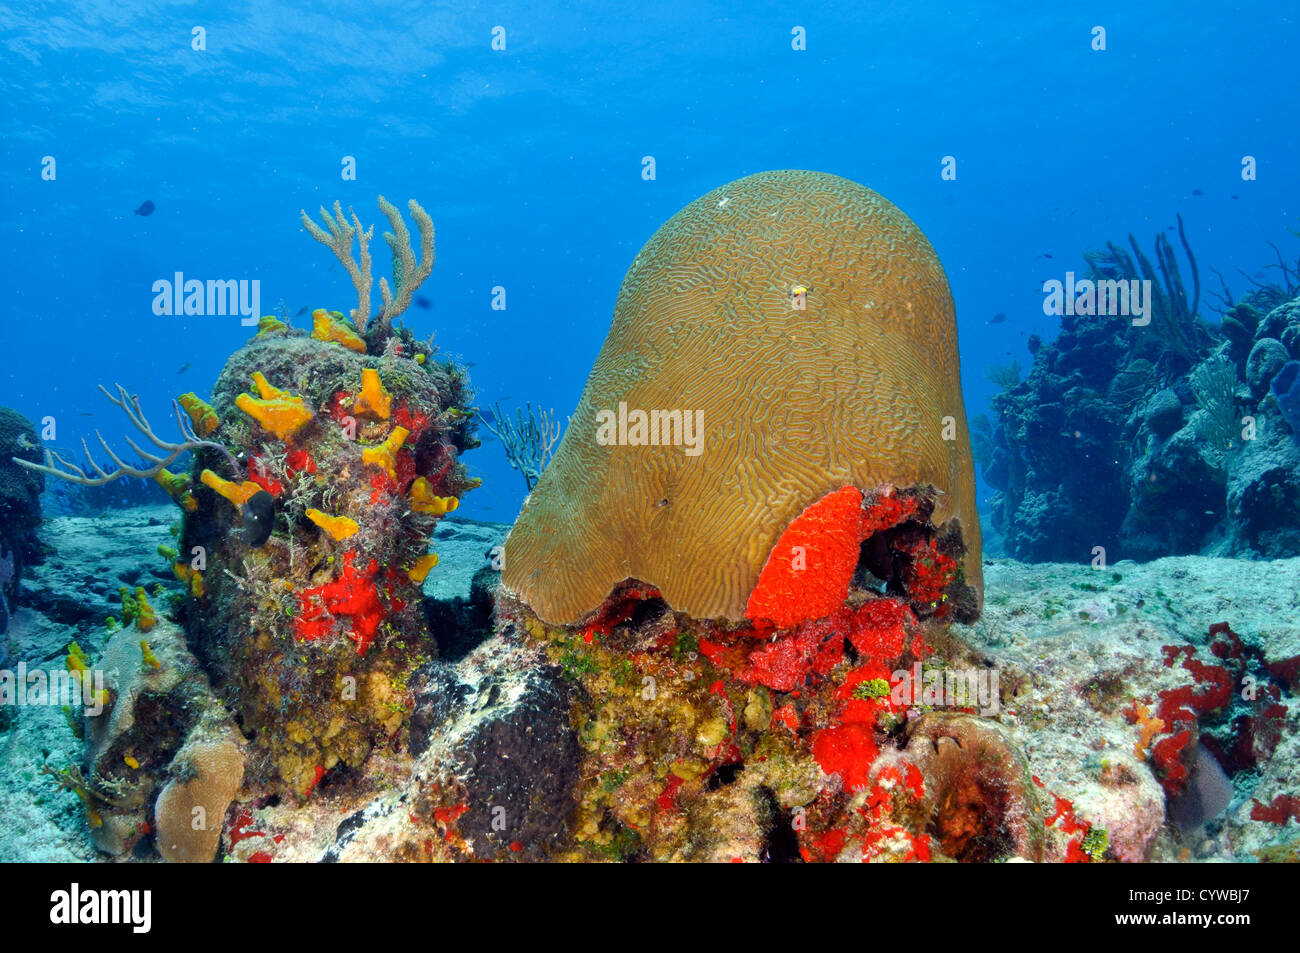 Colorful coral reefs and sponges, Cozumel, Quintana-Roo, Mexico, Caribbean Sea Stock Photo